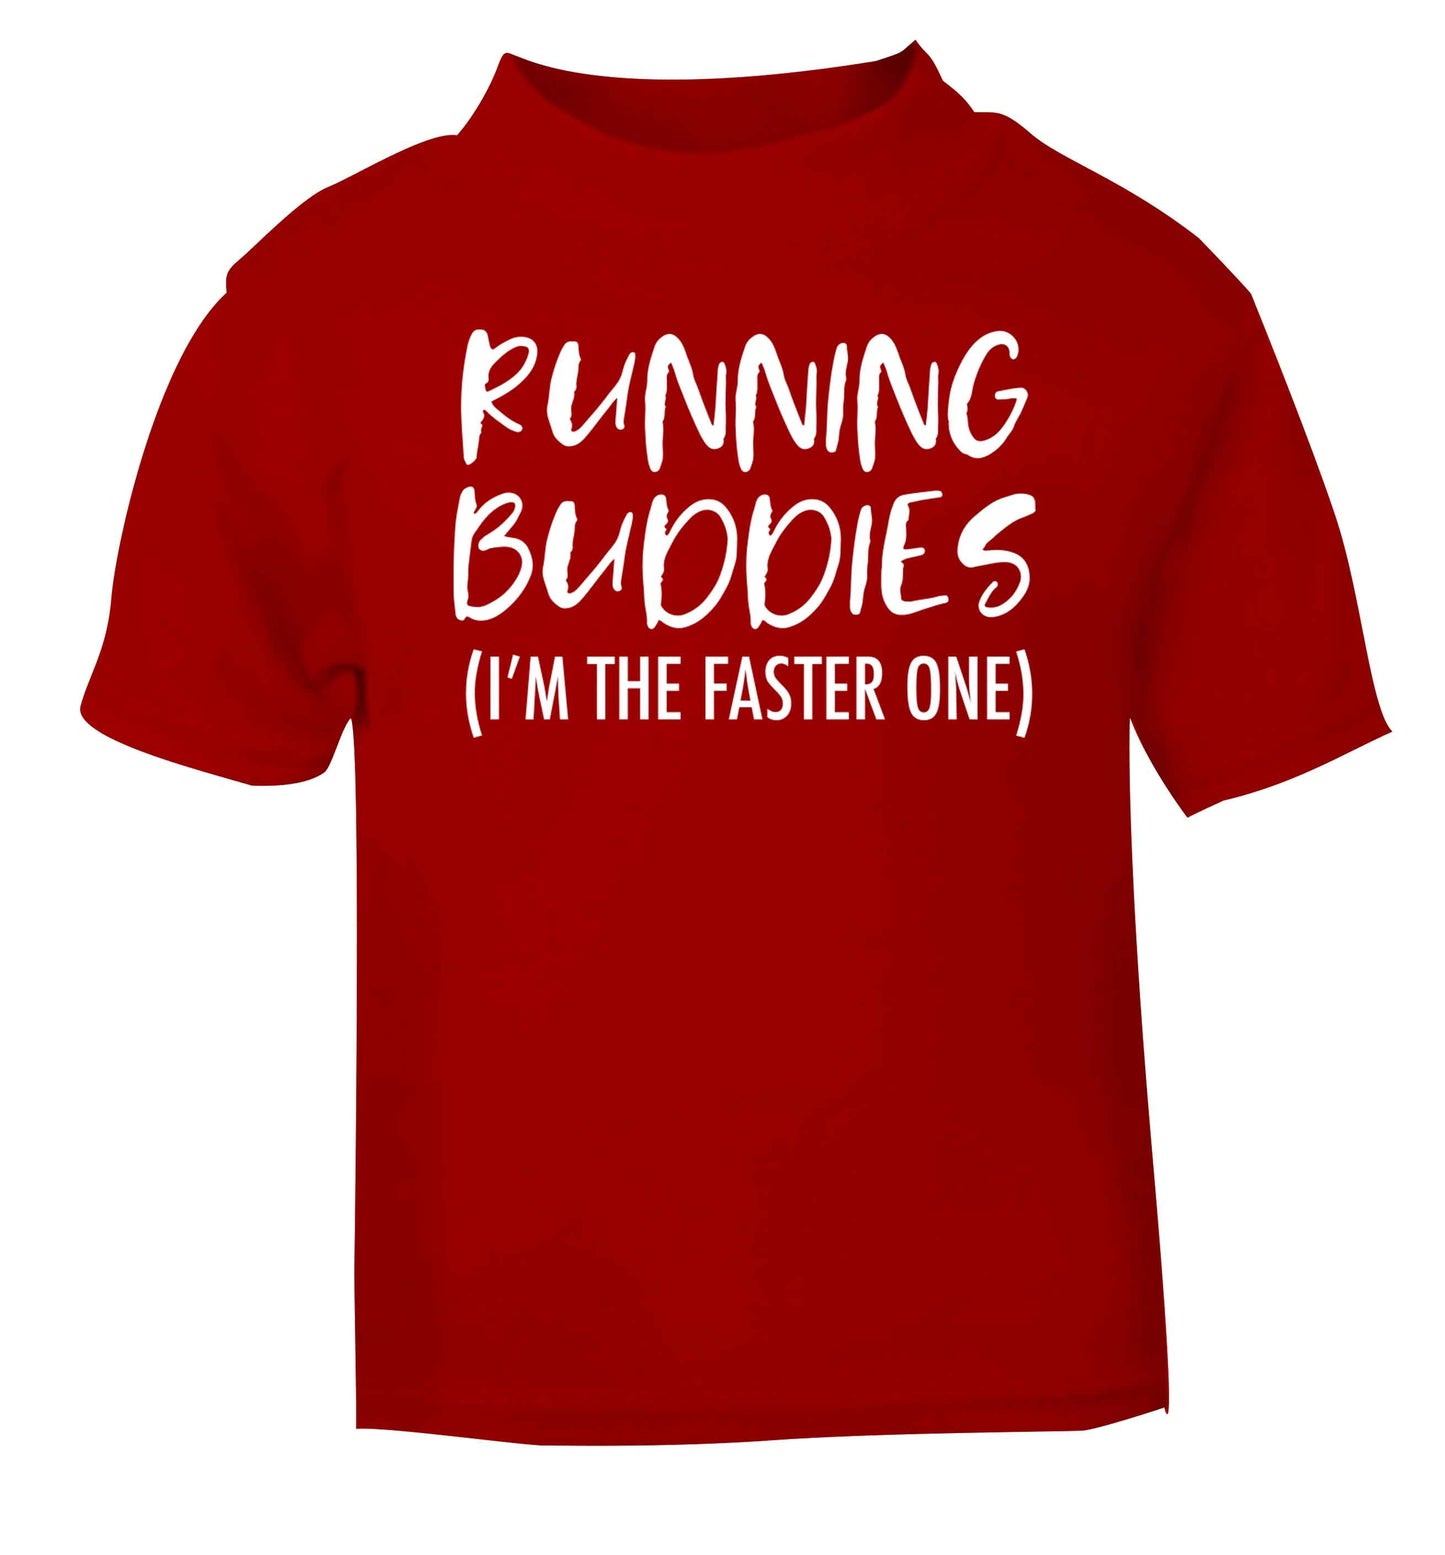 Running buddies (I'm the faster one) red baby toddler Tshirt 2 Years